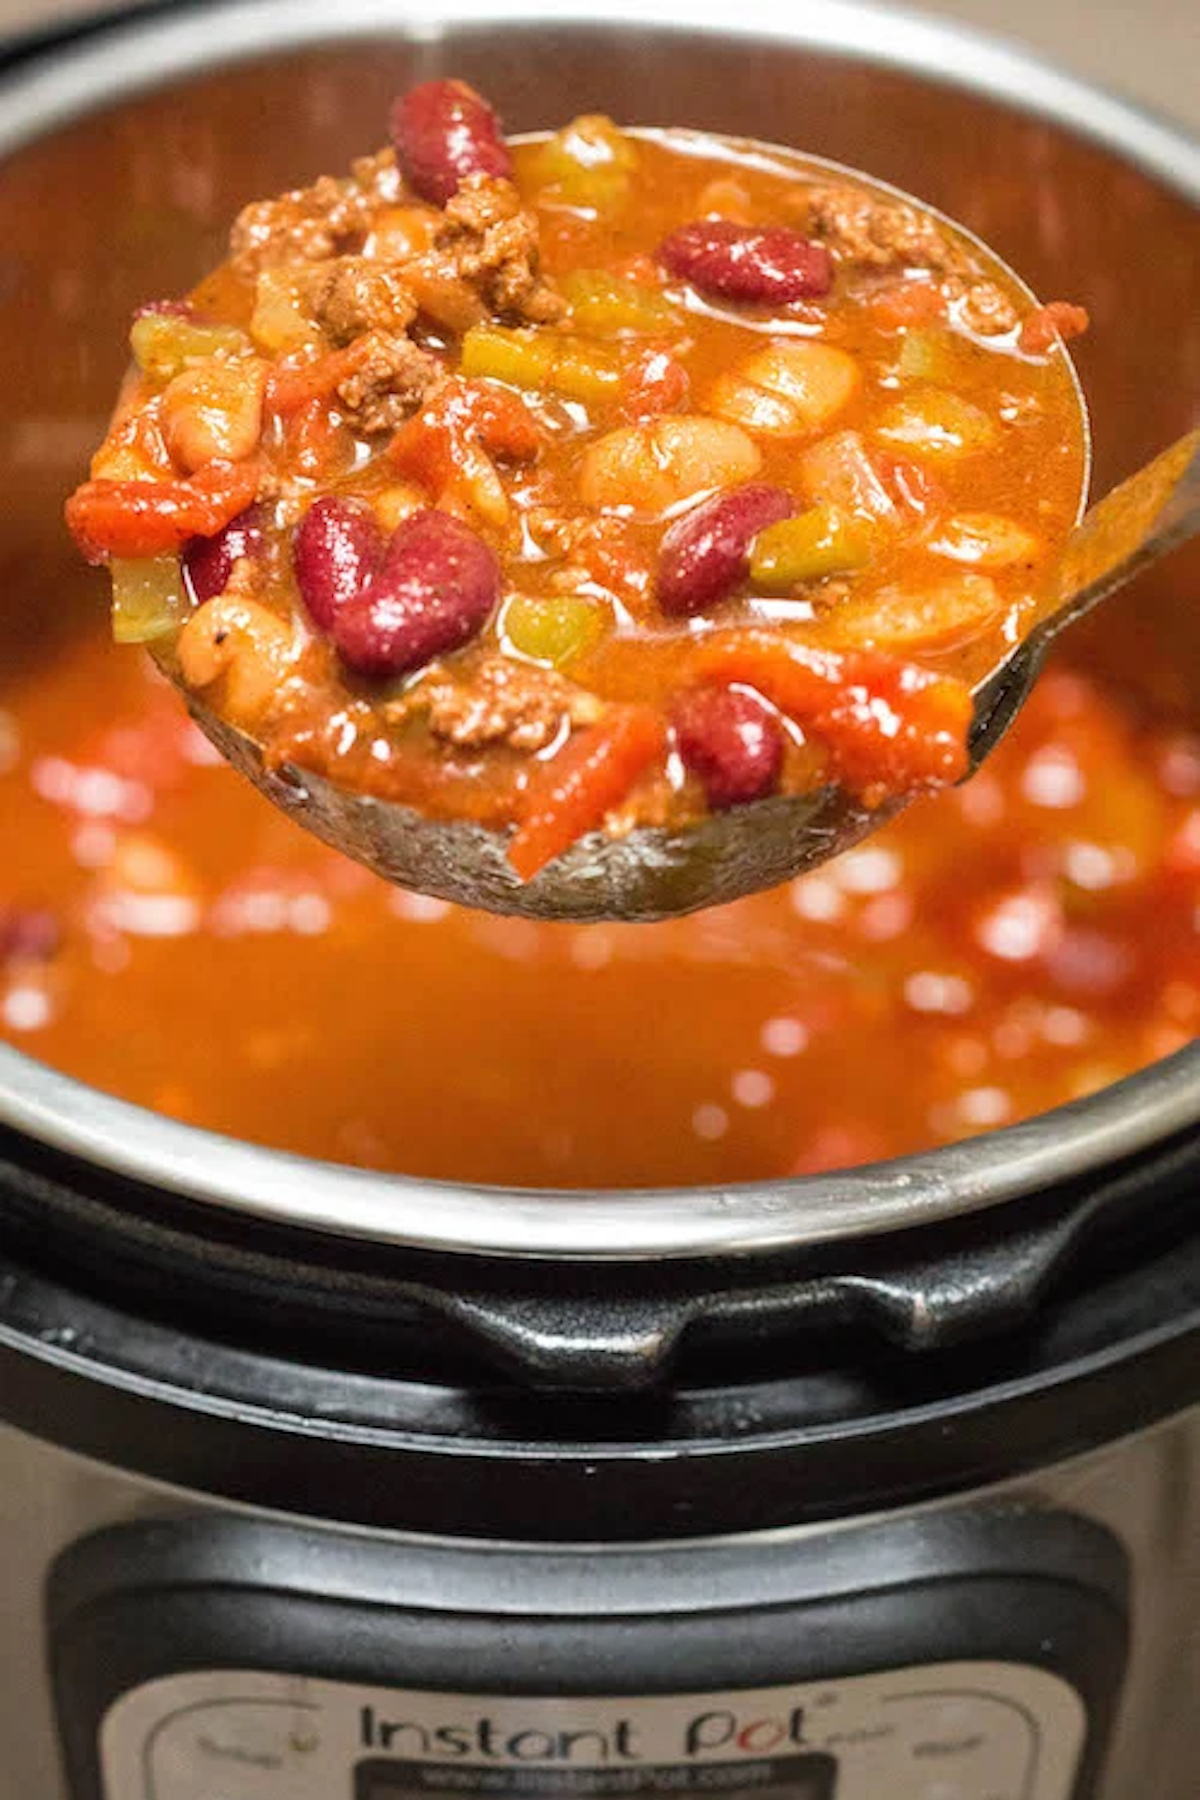 A ladle full of copycat Wendy's Chili is in focus over the Instant Pot which is out of focus.